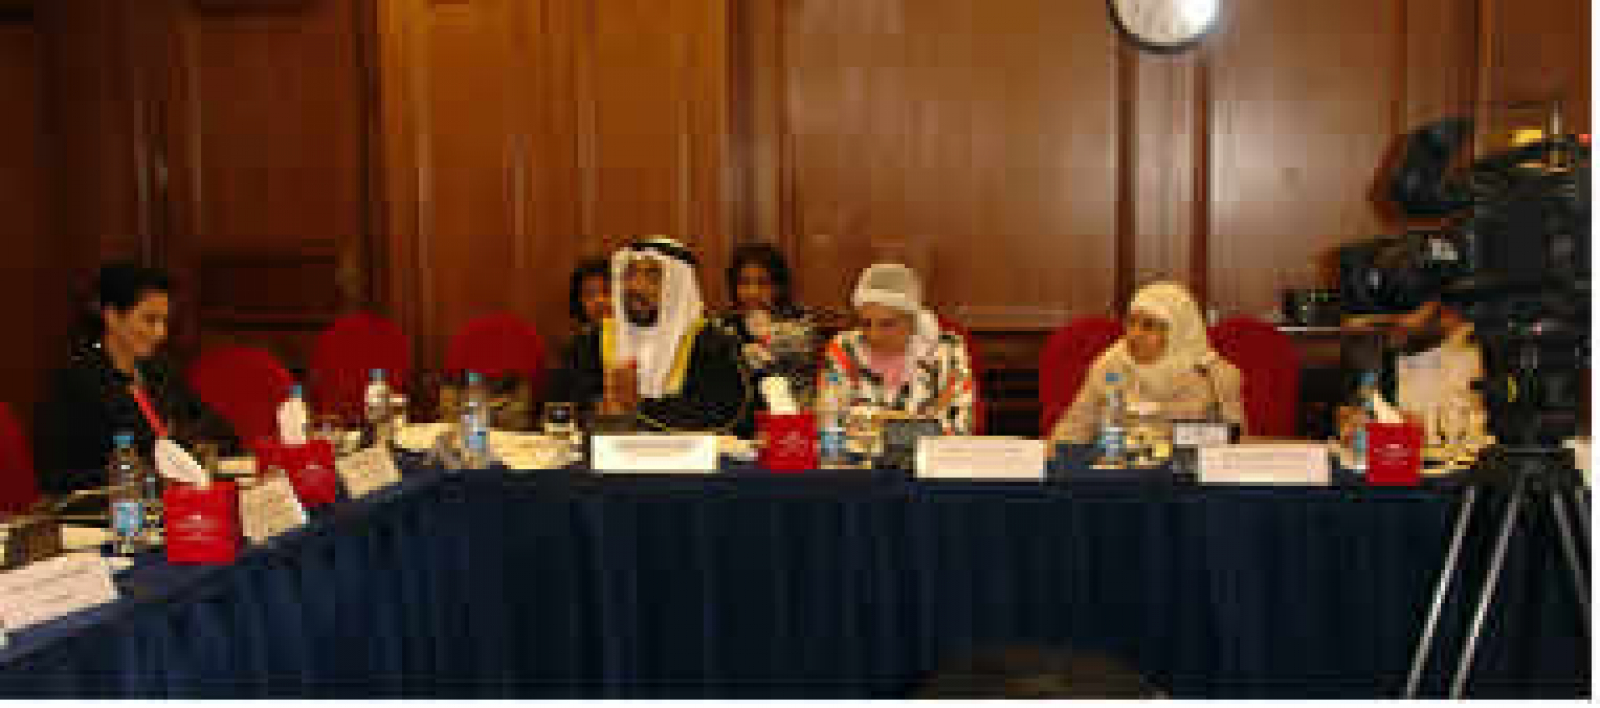 Bahrain Women’s Union Calls for Action on Domestic Violence Law